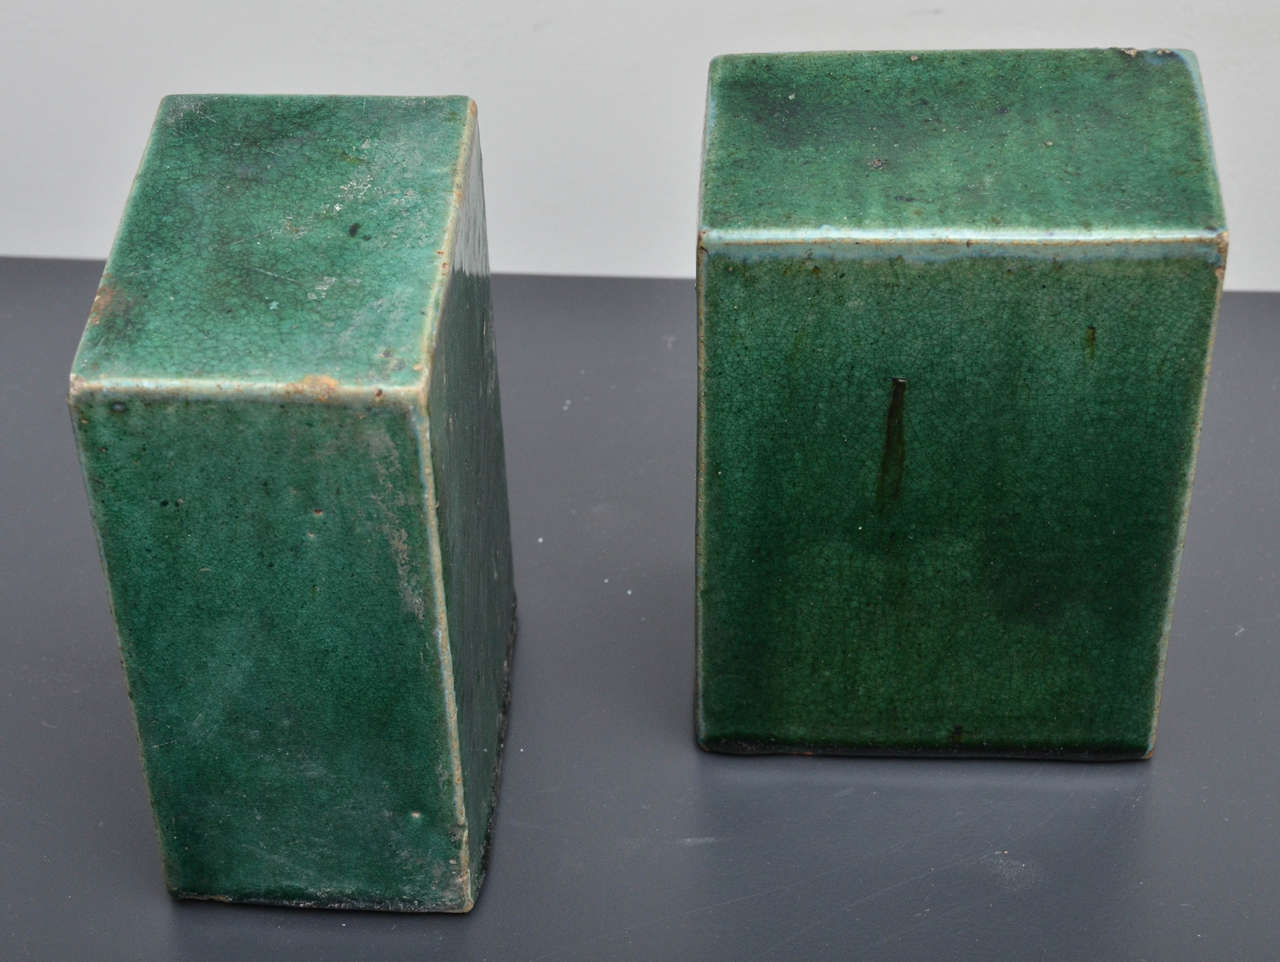 Pair of green ceramic rectangular decorative objects. They have a beautiful textural and bright green glazing to them.